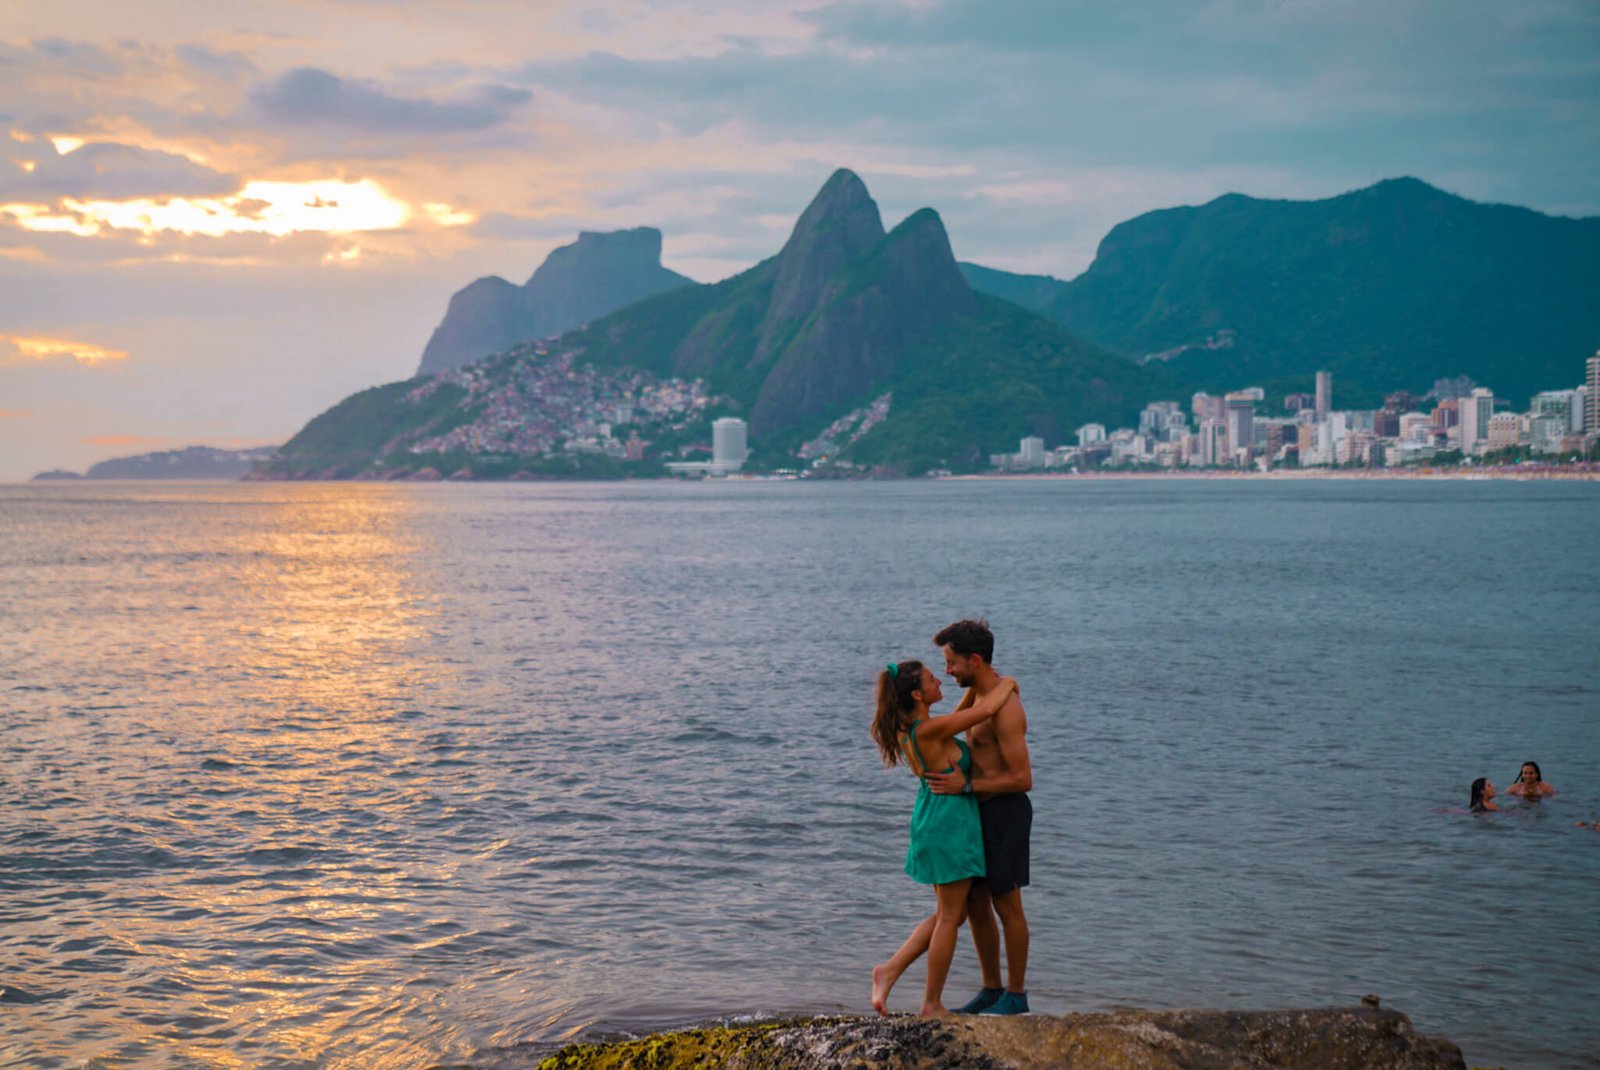 Ipanema, where to stay during Rio carnival